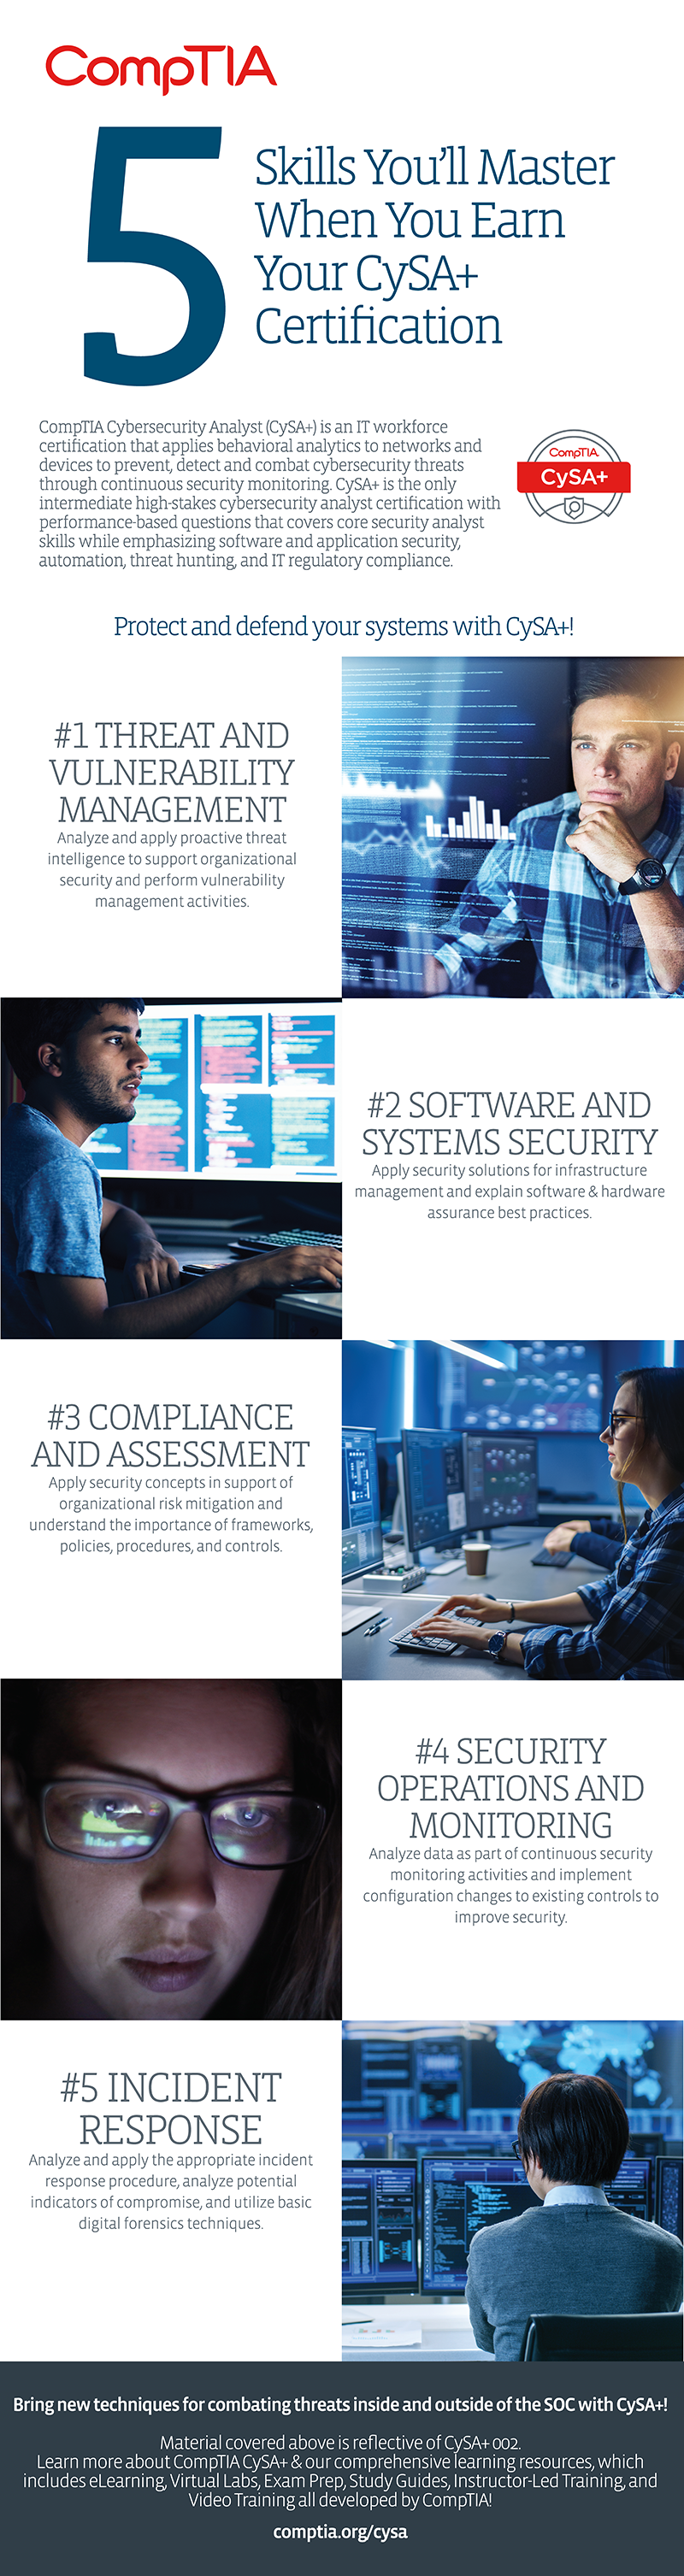 An infographic highlighting the five skills covered by CompTIA Cybersecurity Anaylst (CySA+): threat and vulnerability management, software and systems security, compliance and assessment, security operations and monitoring, and incident response.